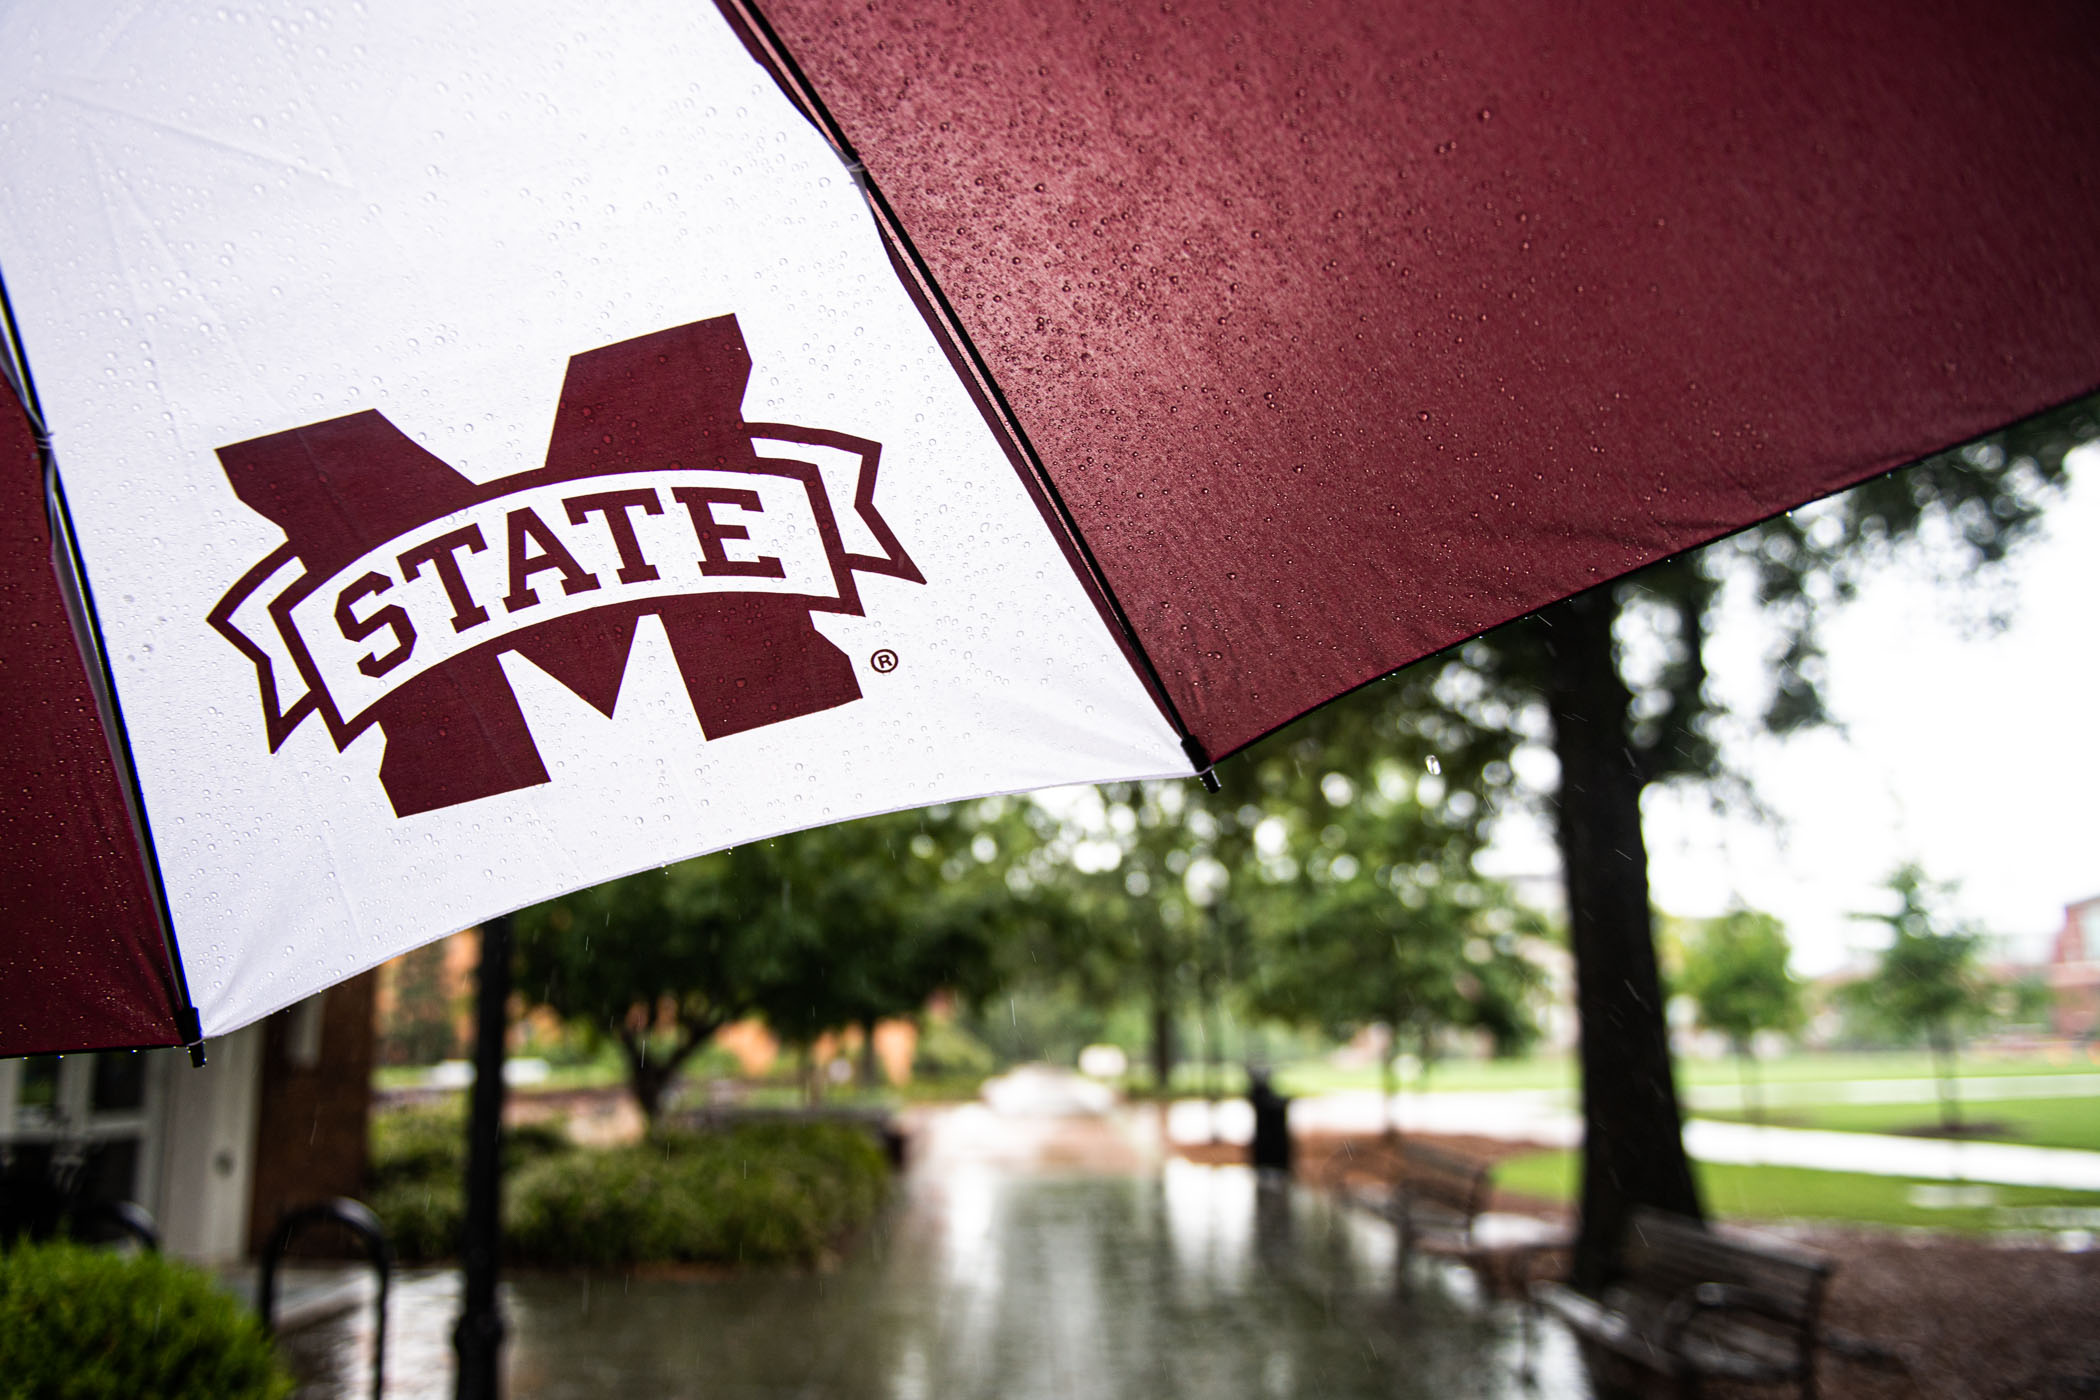 A large MSU maroon and white umbrella stands out against an early and rainy August afternoon on campus.